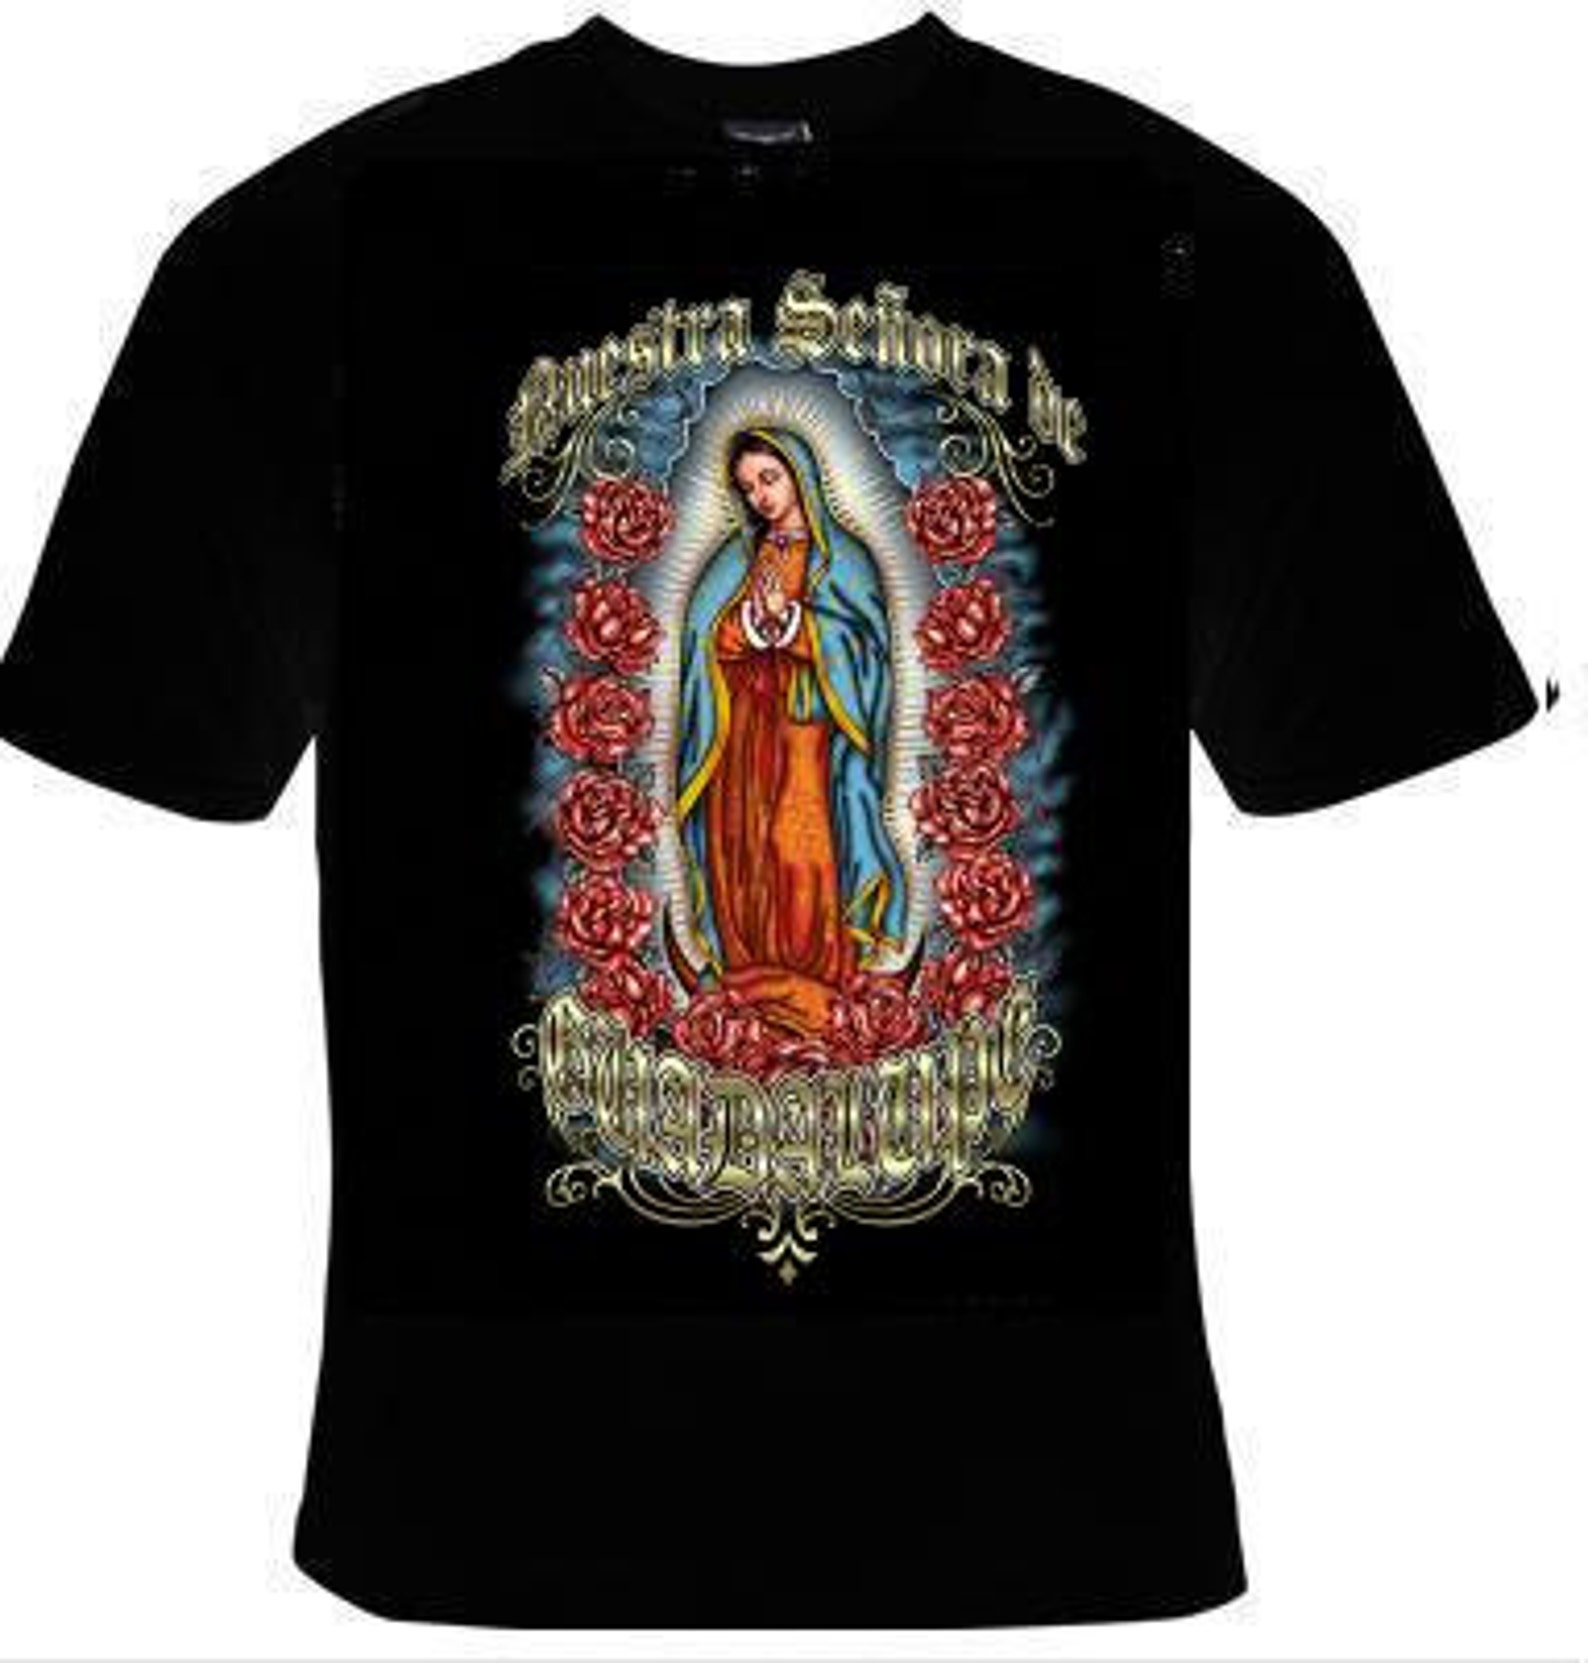 Our Lady of GUADALUPE T-shirt Unisex Tee Shirt Mary - Etsy